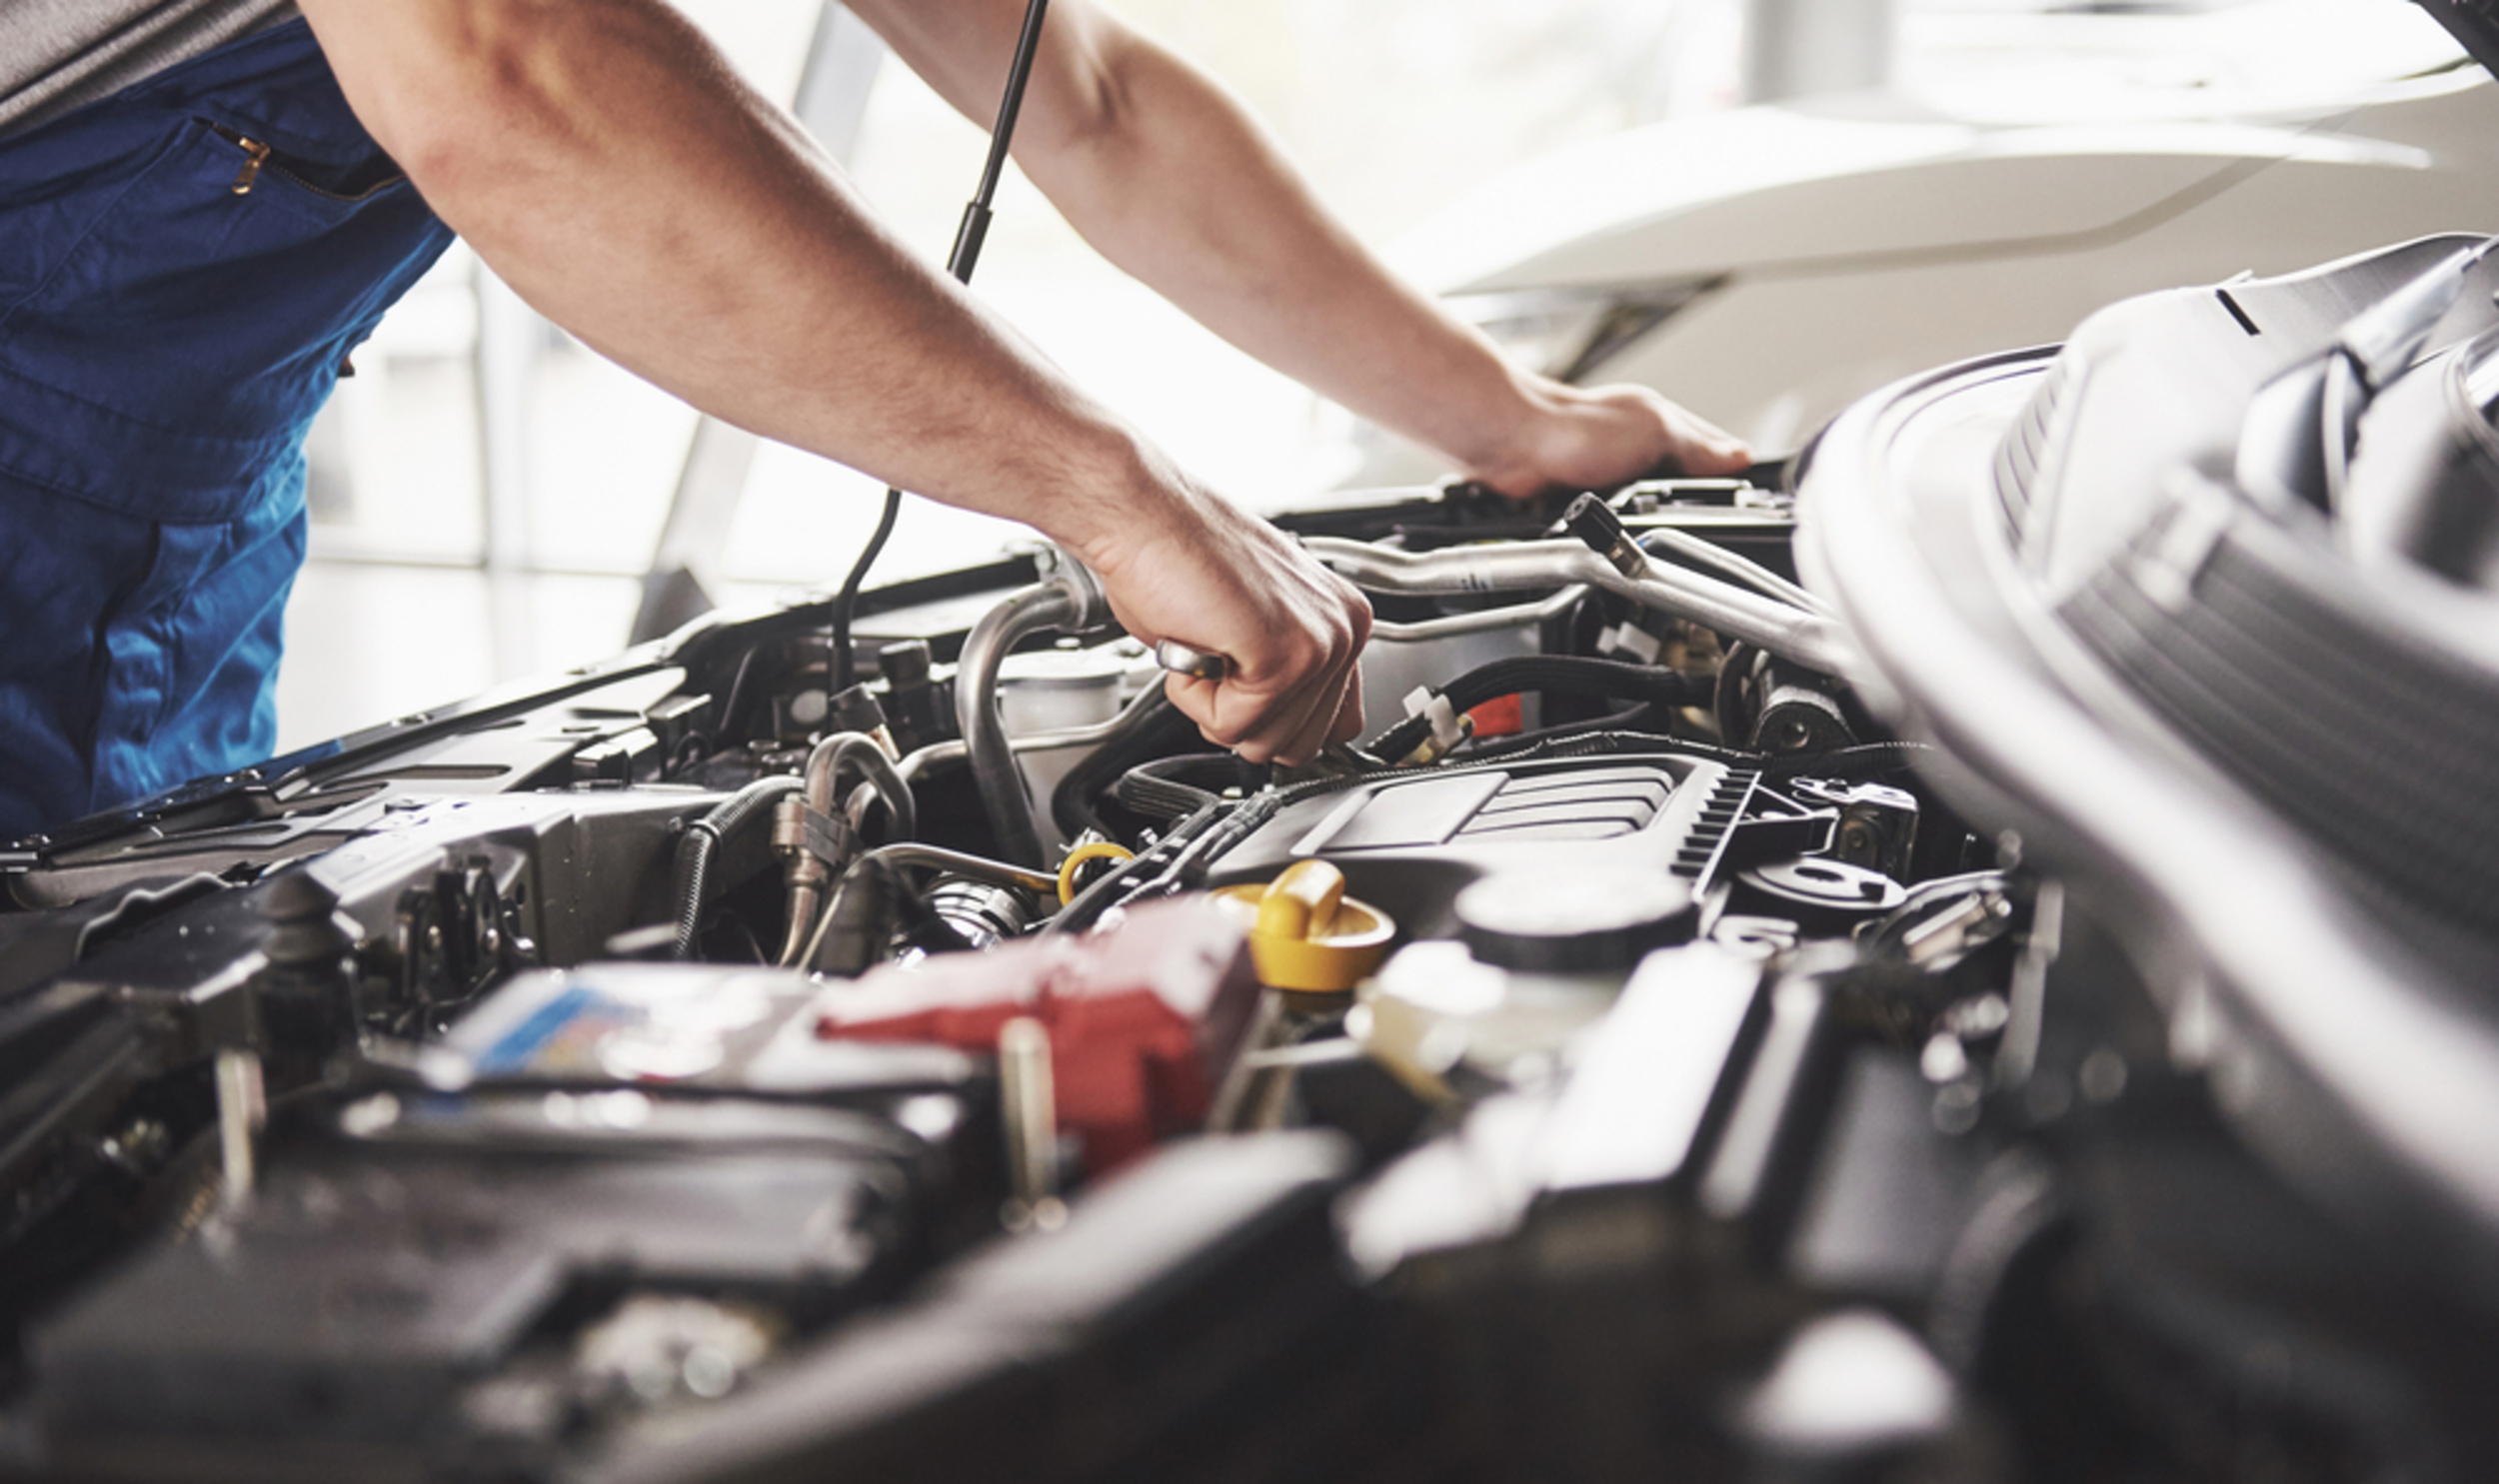 <p>Before heading out on your trip, make sure that your car is in traveling condition. Check the oil, tires, and headlights, and ensure that everything is in proper working order. </p>